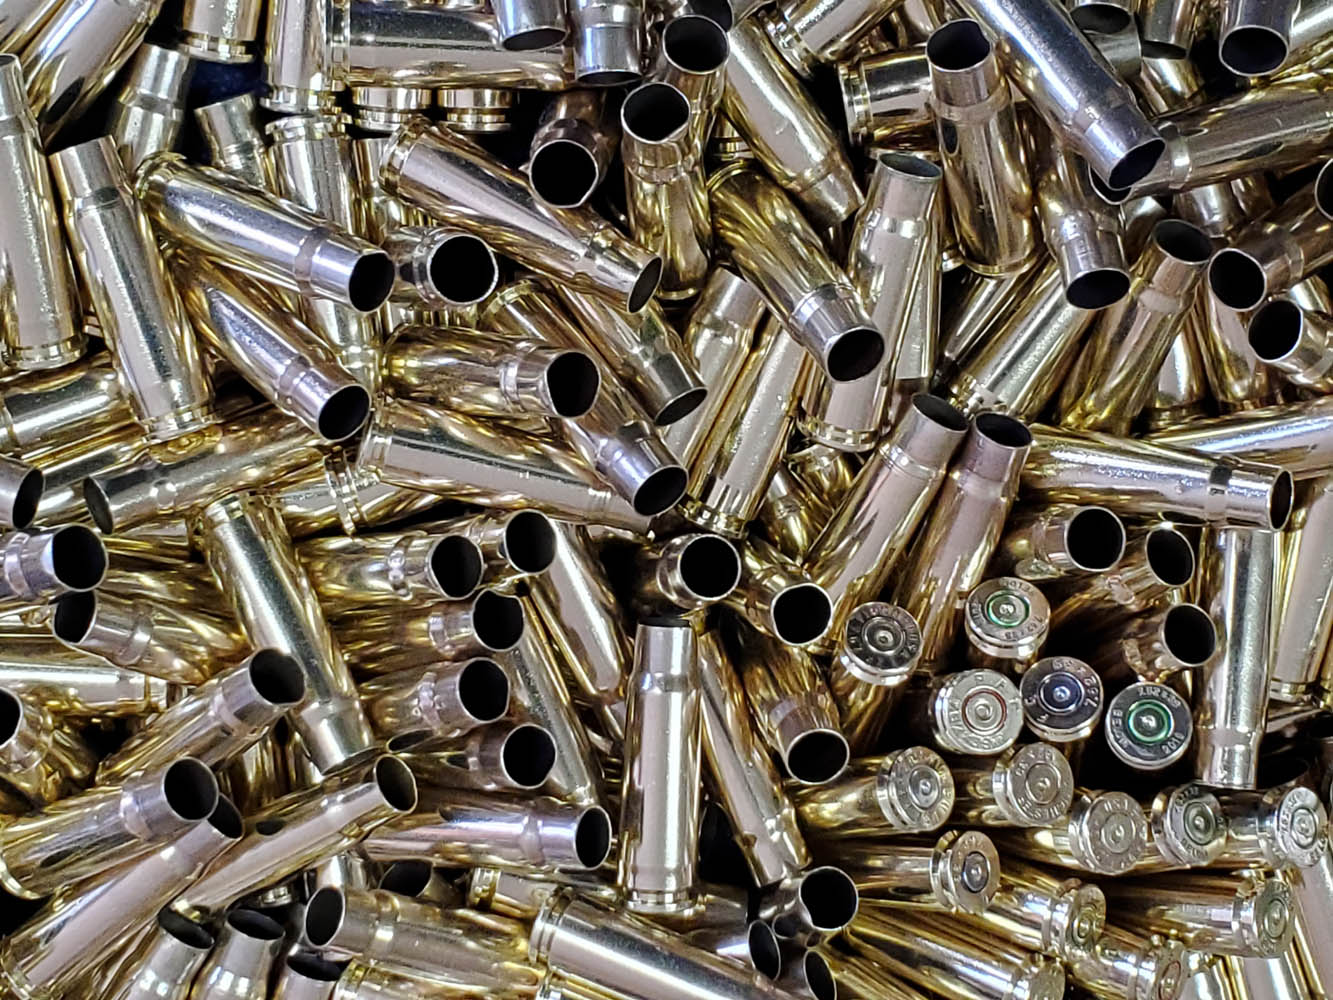 7.62x39 Once Fired Brass 200 Count - Once Fired Brass